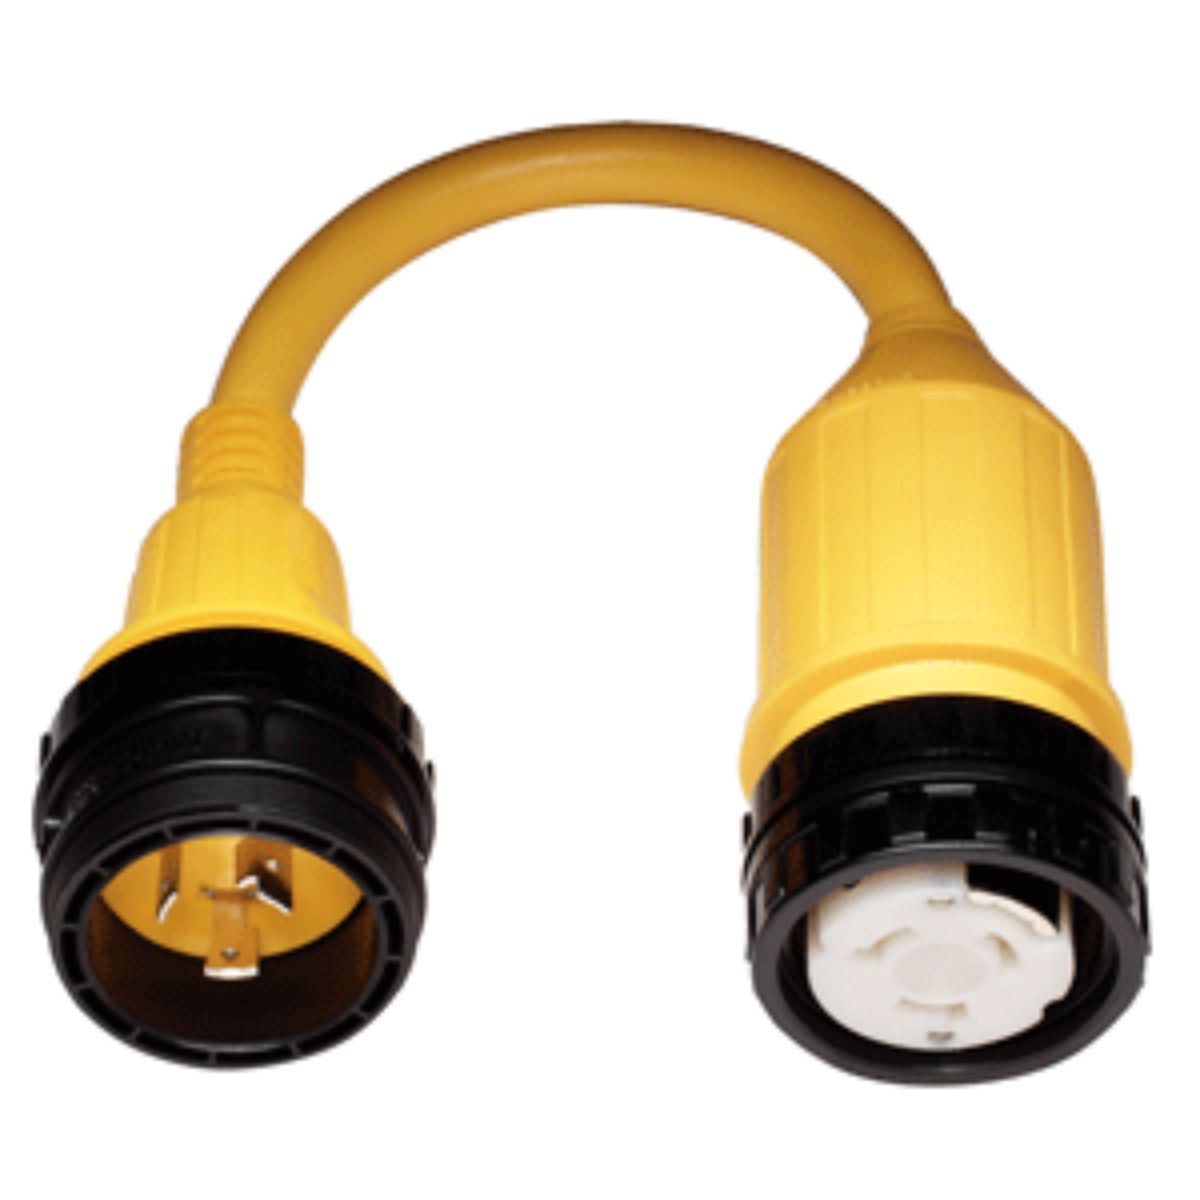 Marinco 11" Yellow Marinco 117A 50A Female to 30A Male Pigtail Adapter